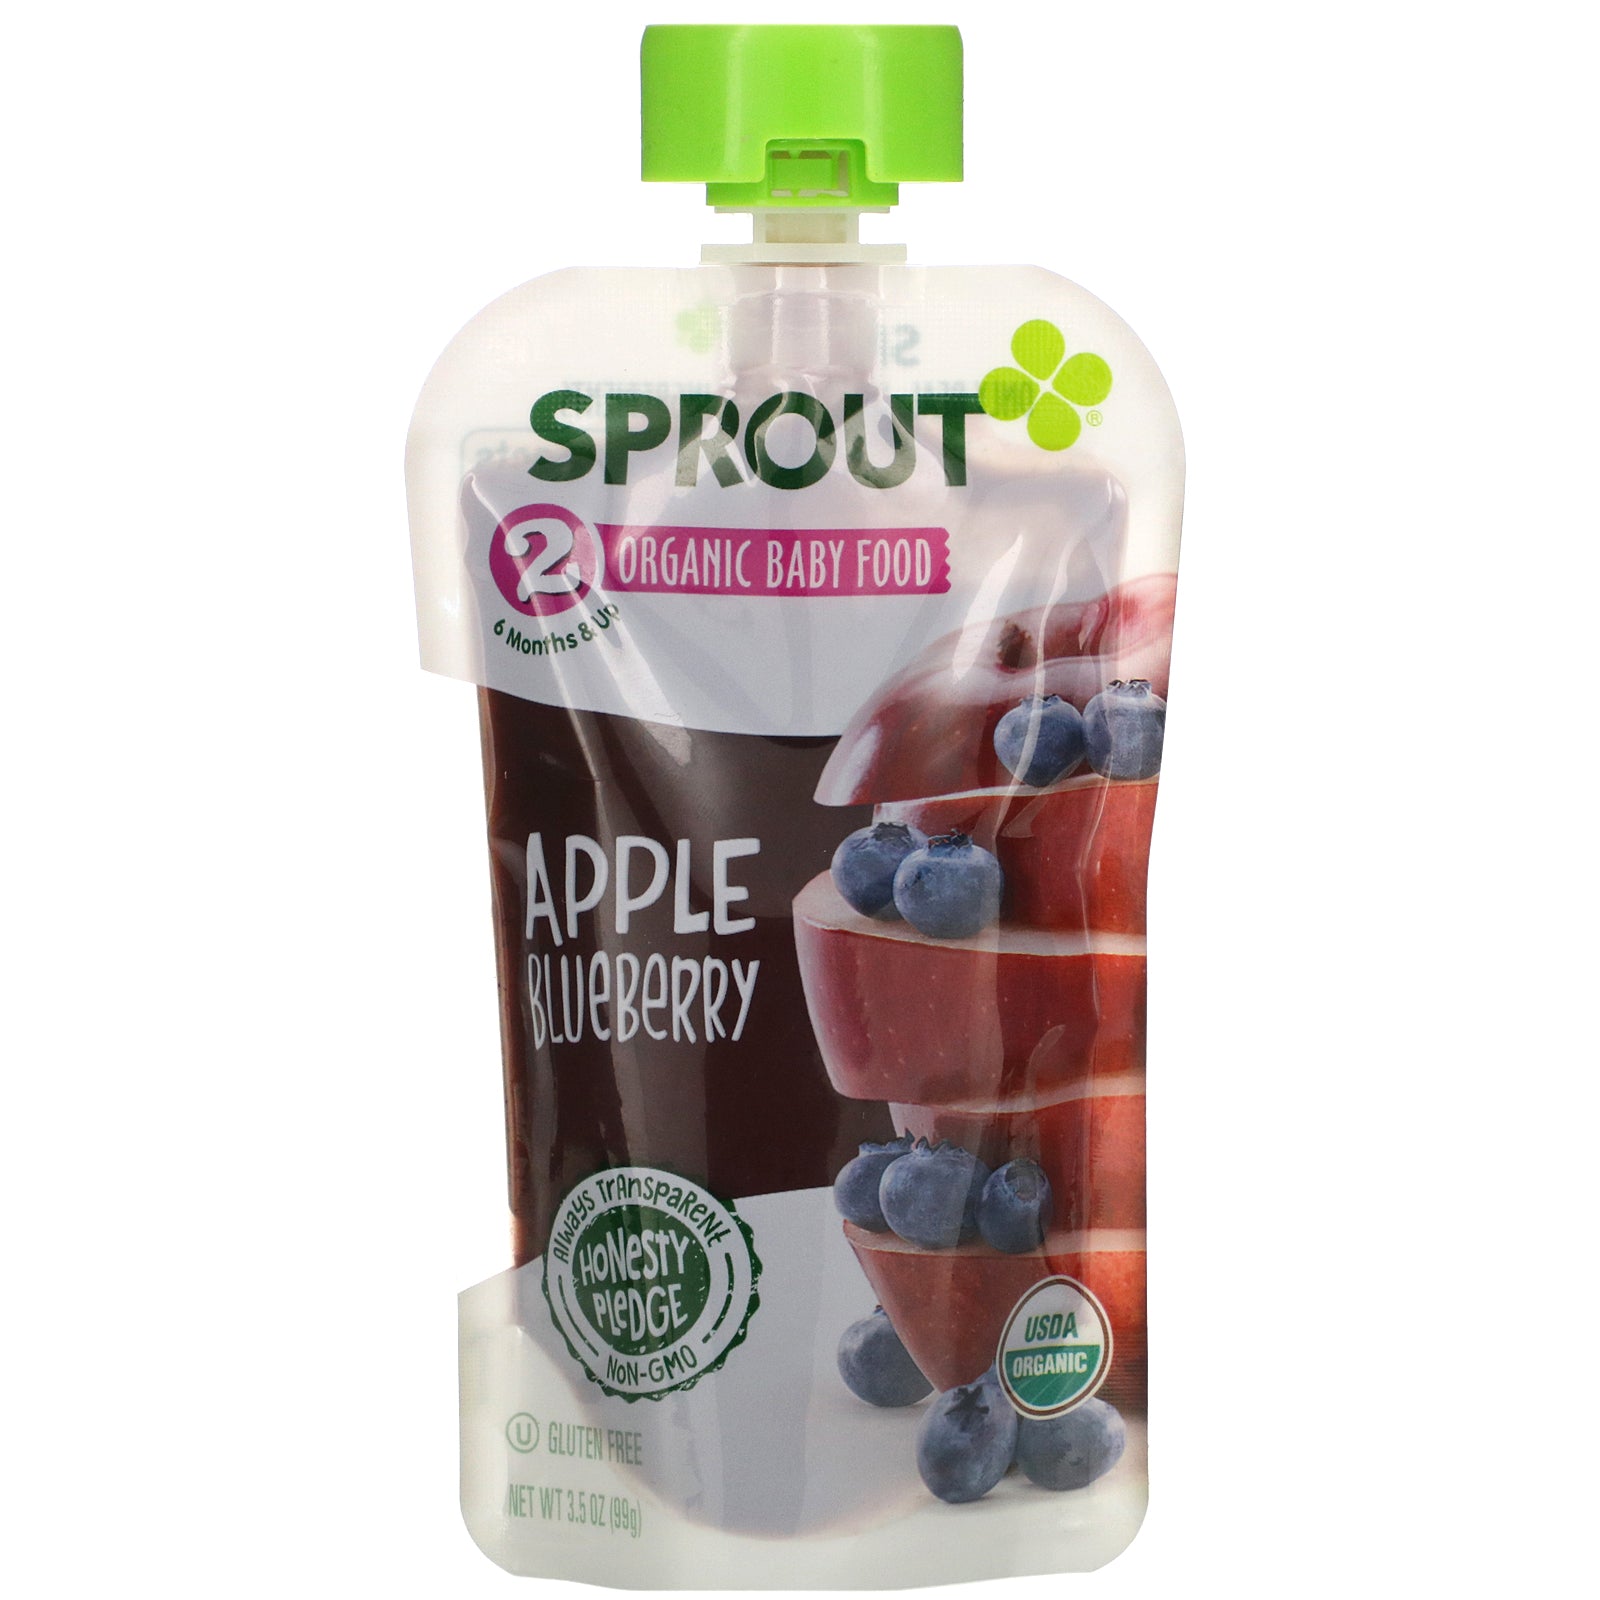 Sprout Organic, Baby Food, 6 Months & Up, Apple Blueberry, 3.5 oz (99 g)